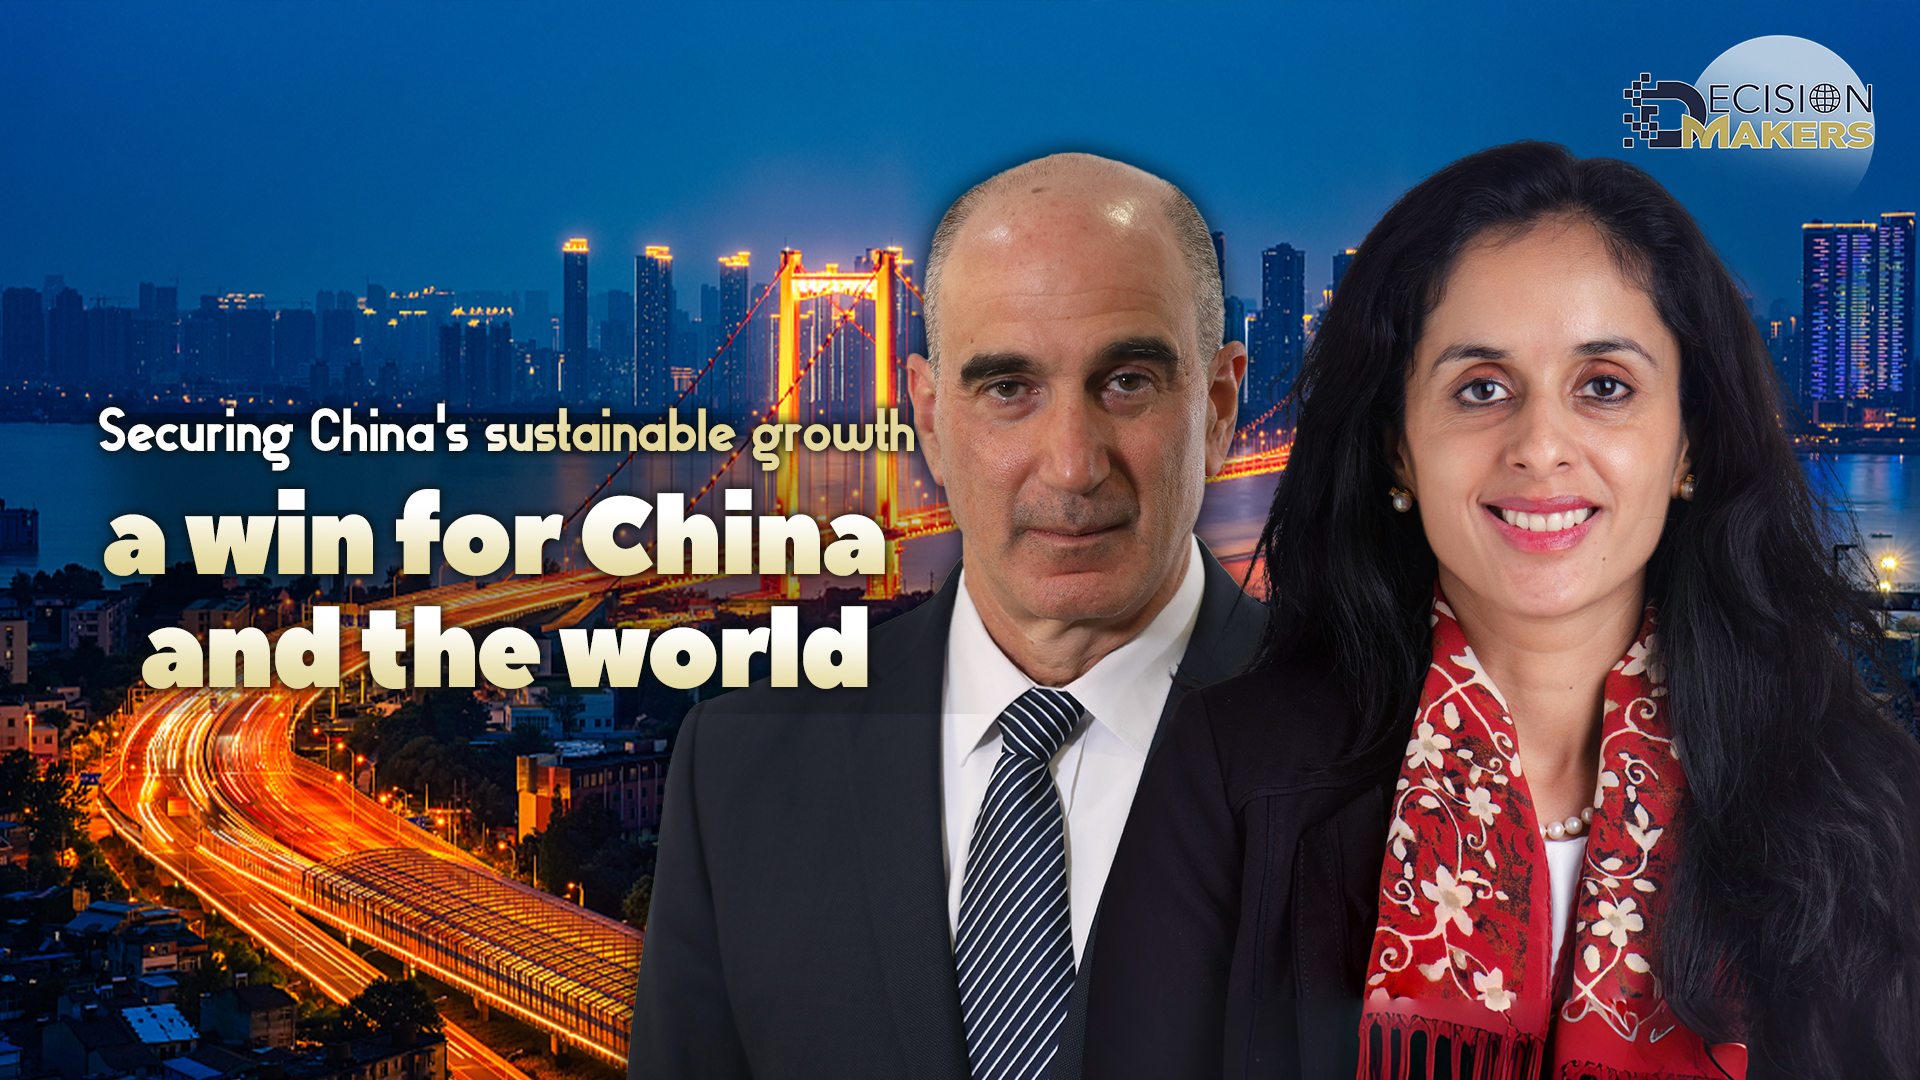 Securing China's sustainable growth a win for China and the world